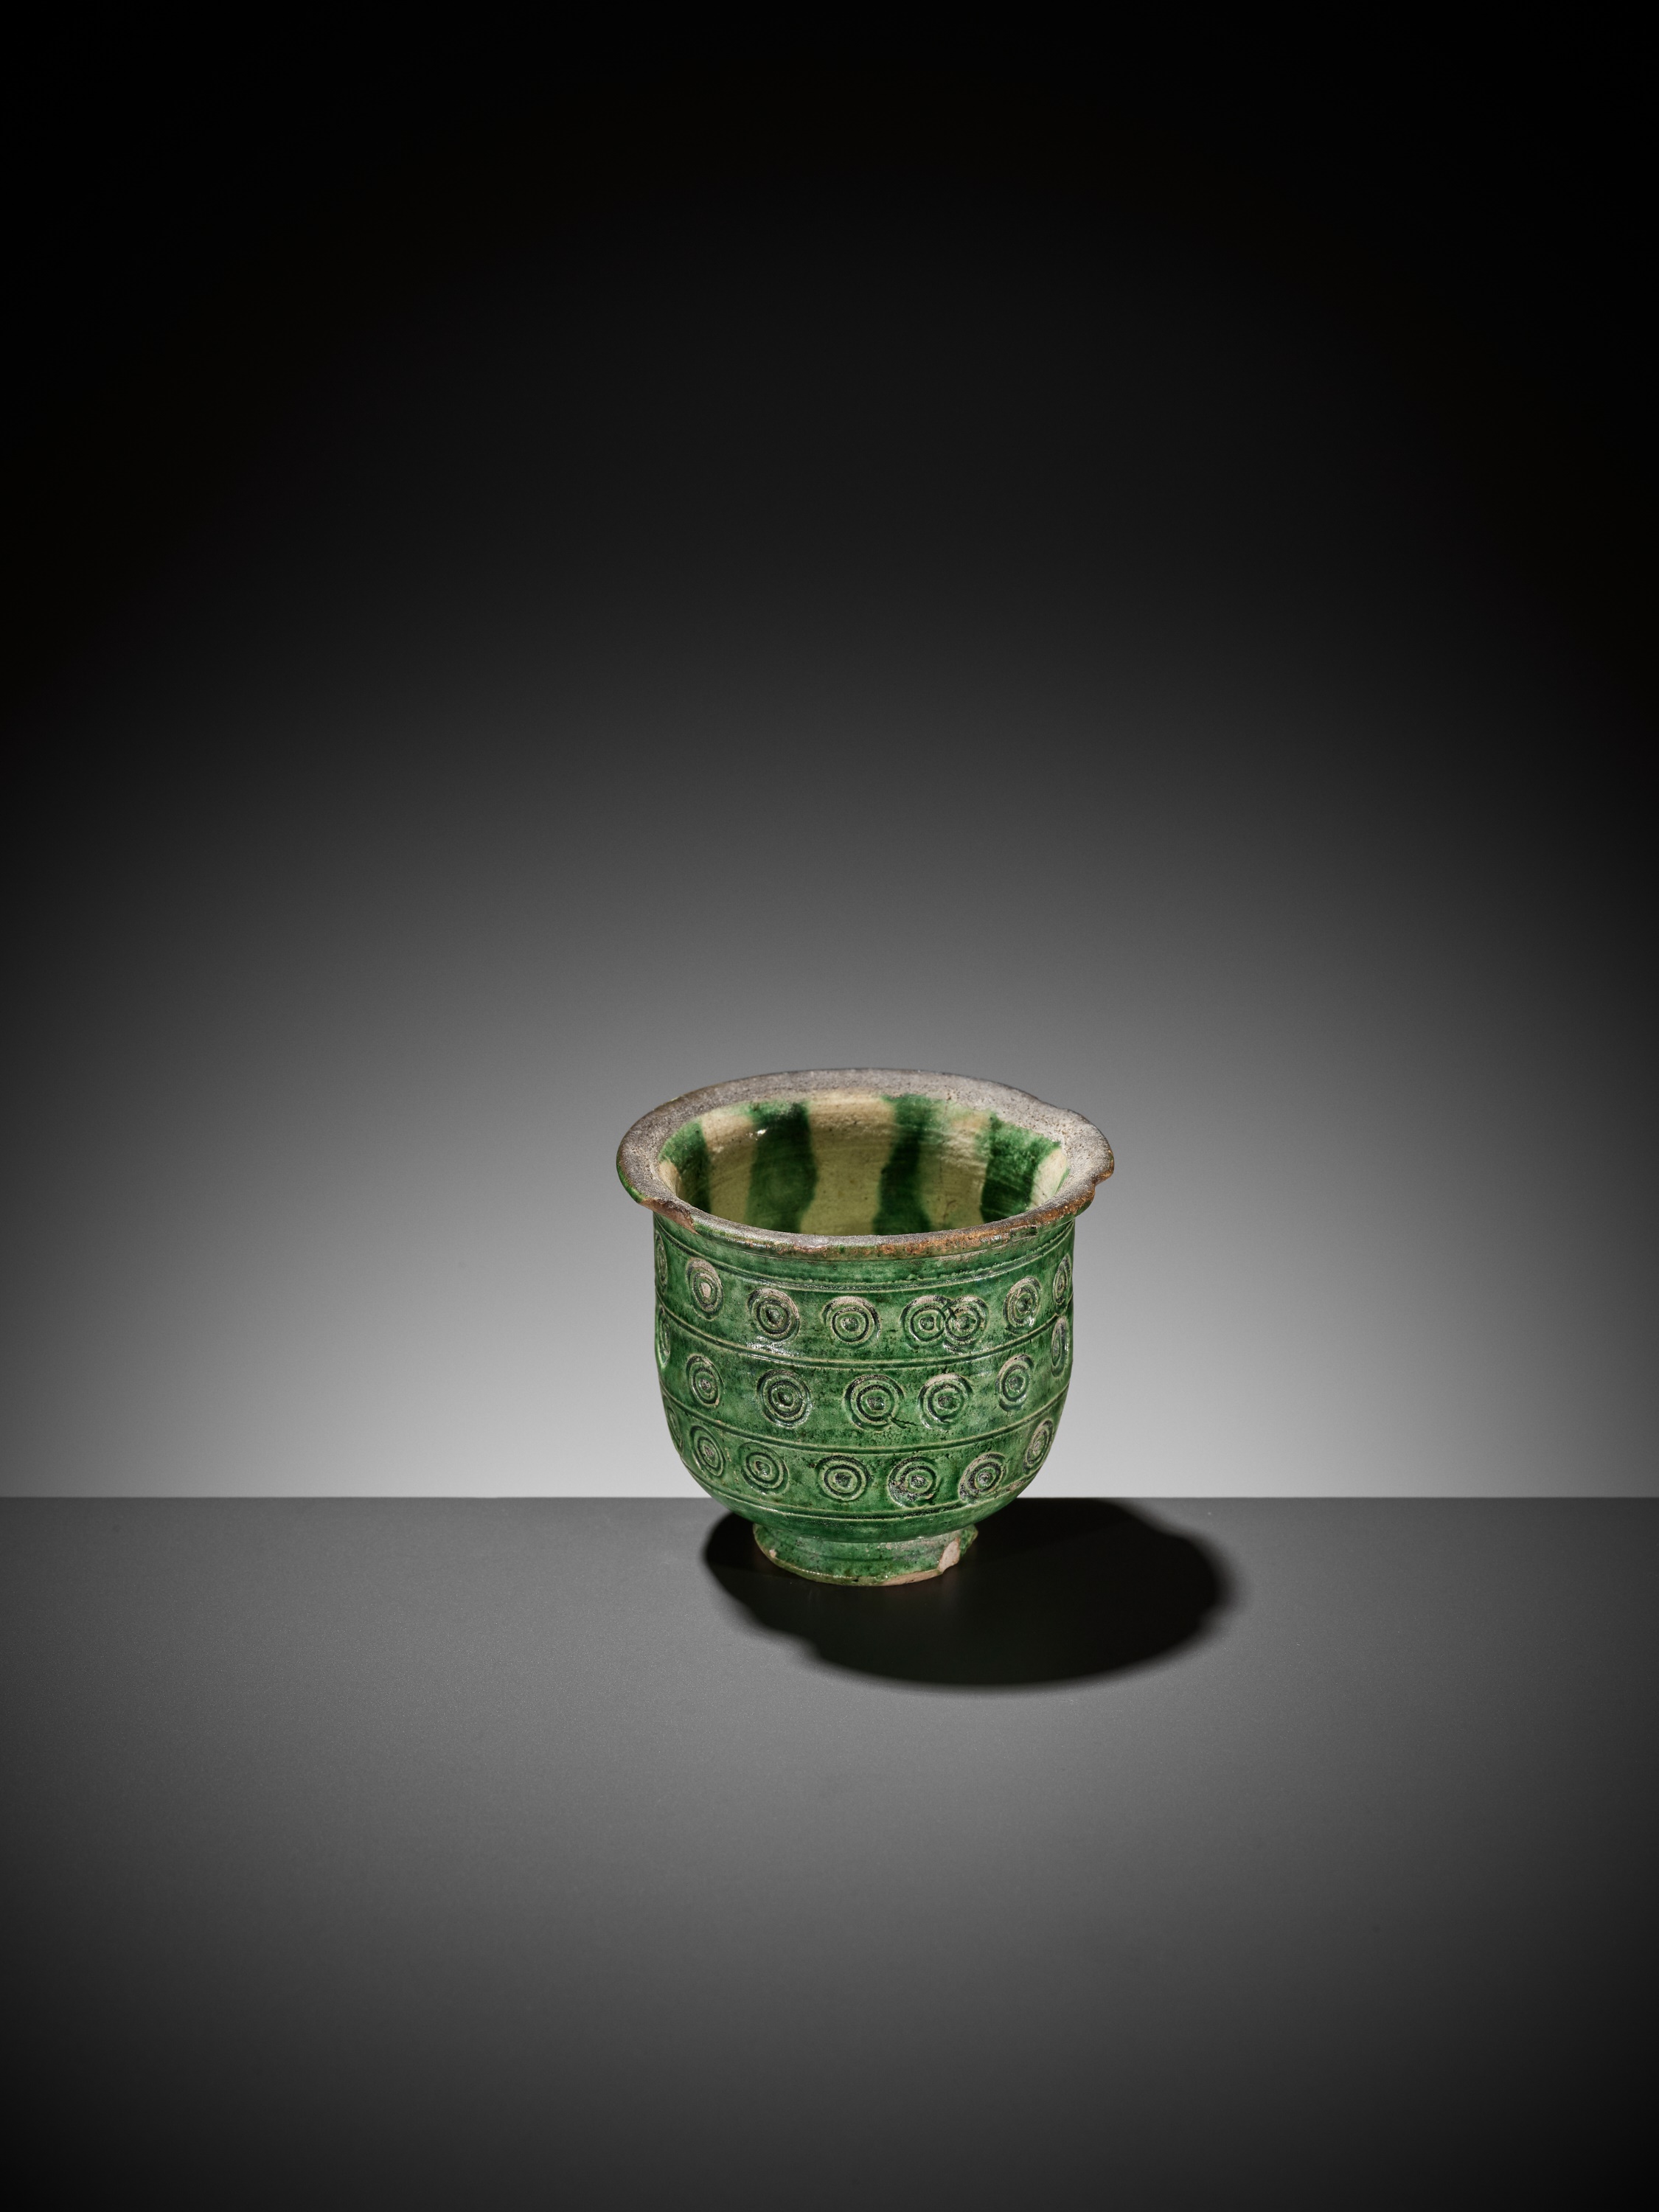 A RARE GREEN-GLAZED BELL-SHAPED CUP, TANG DYNASTY - Image 6 of 8